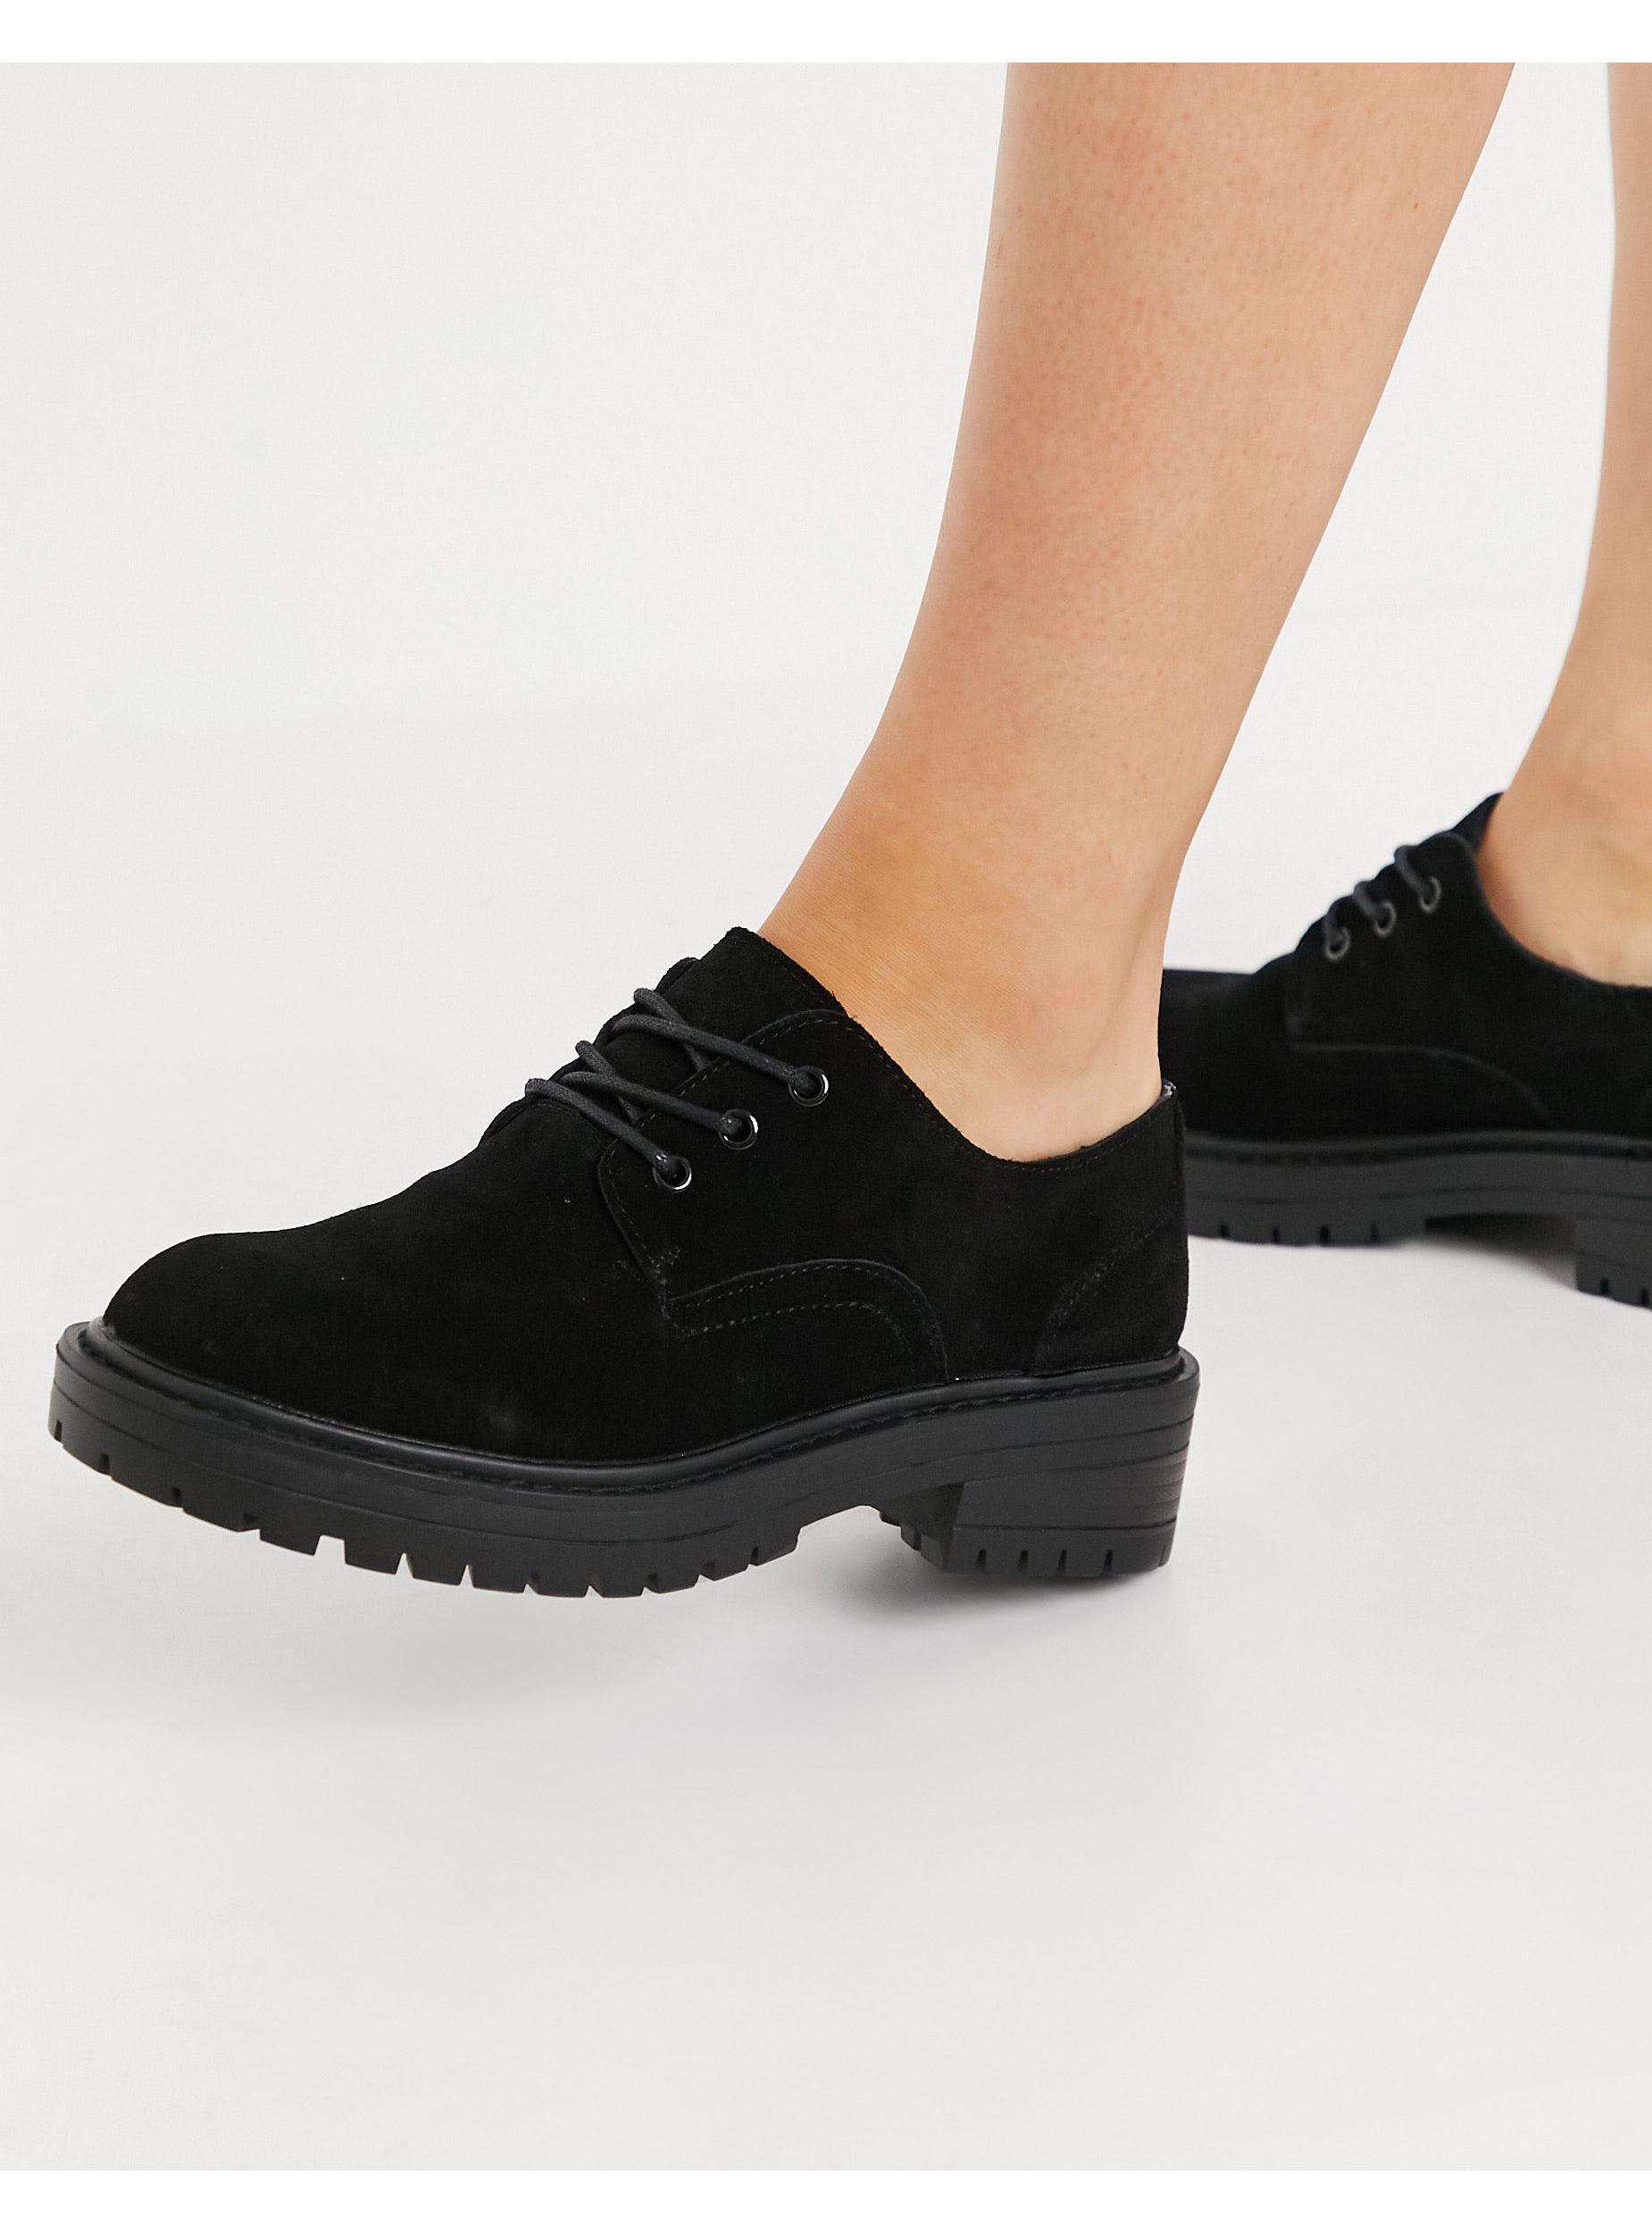 TOPSHOP Suede Lace Up Shoes in Black | Lyst Canada